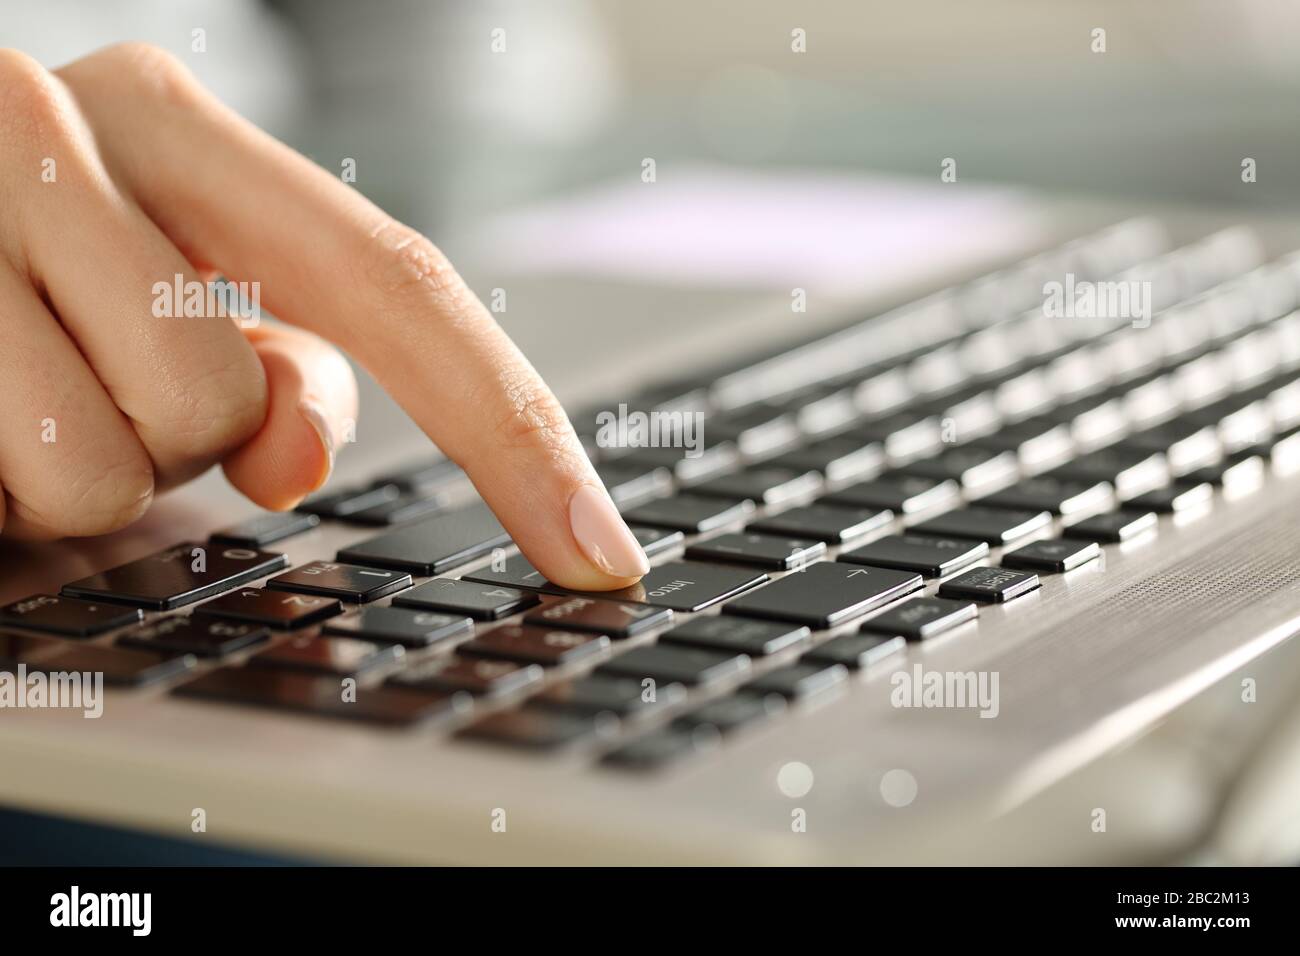 Close up of woman hands pressing enter button on a keyboard Stock Photo